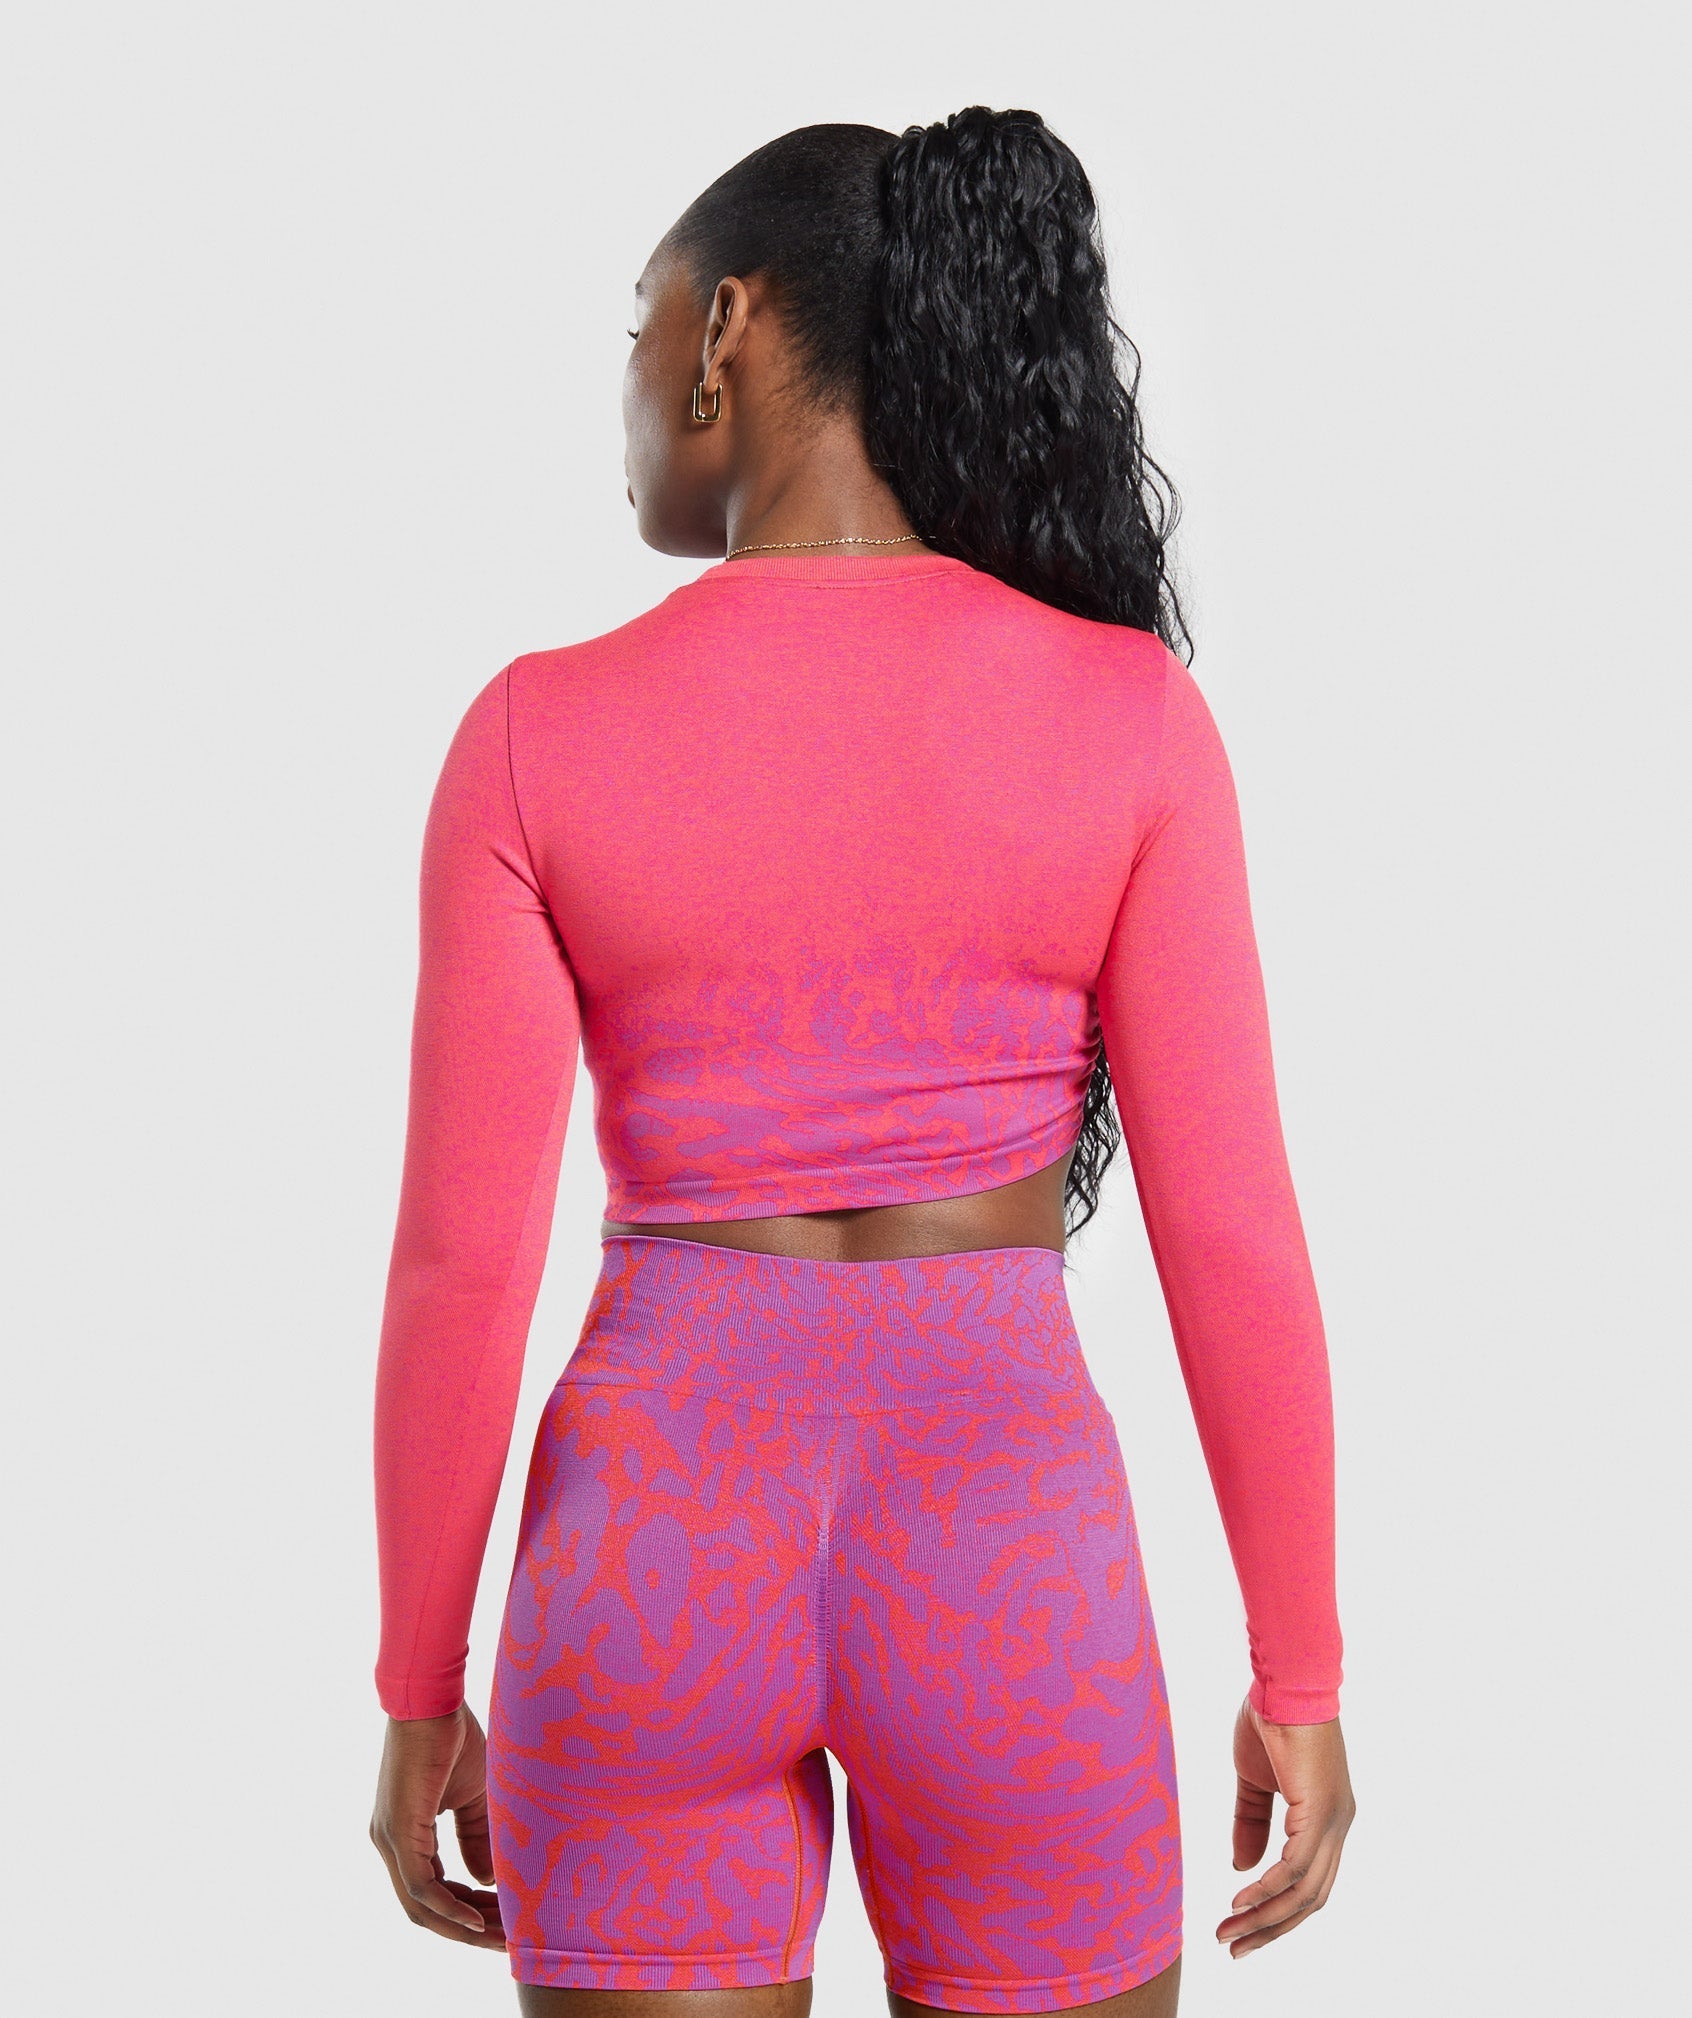 Adapt Safari Seamless Faded Long Sleeve Top in Shelly Pink/Fly Coral - view 2